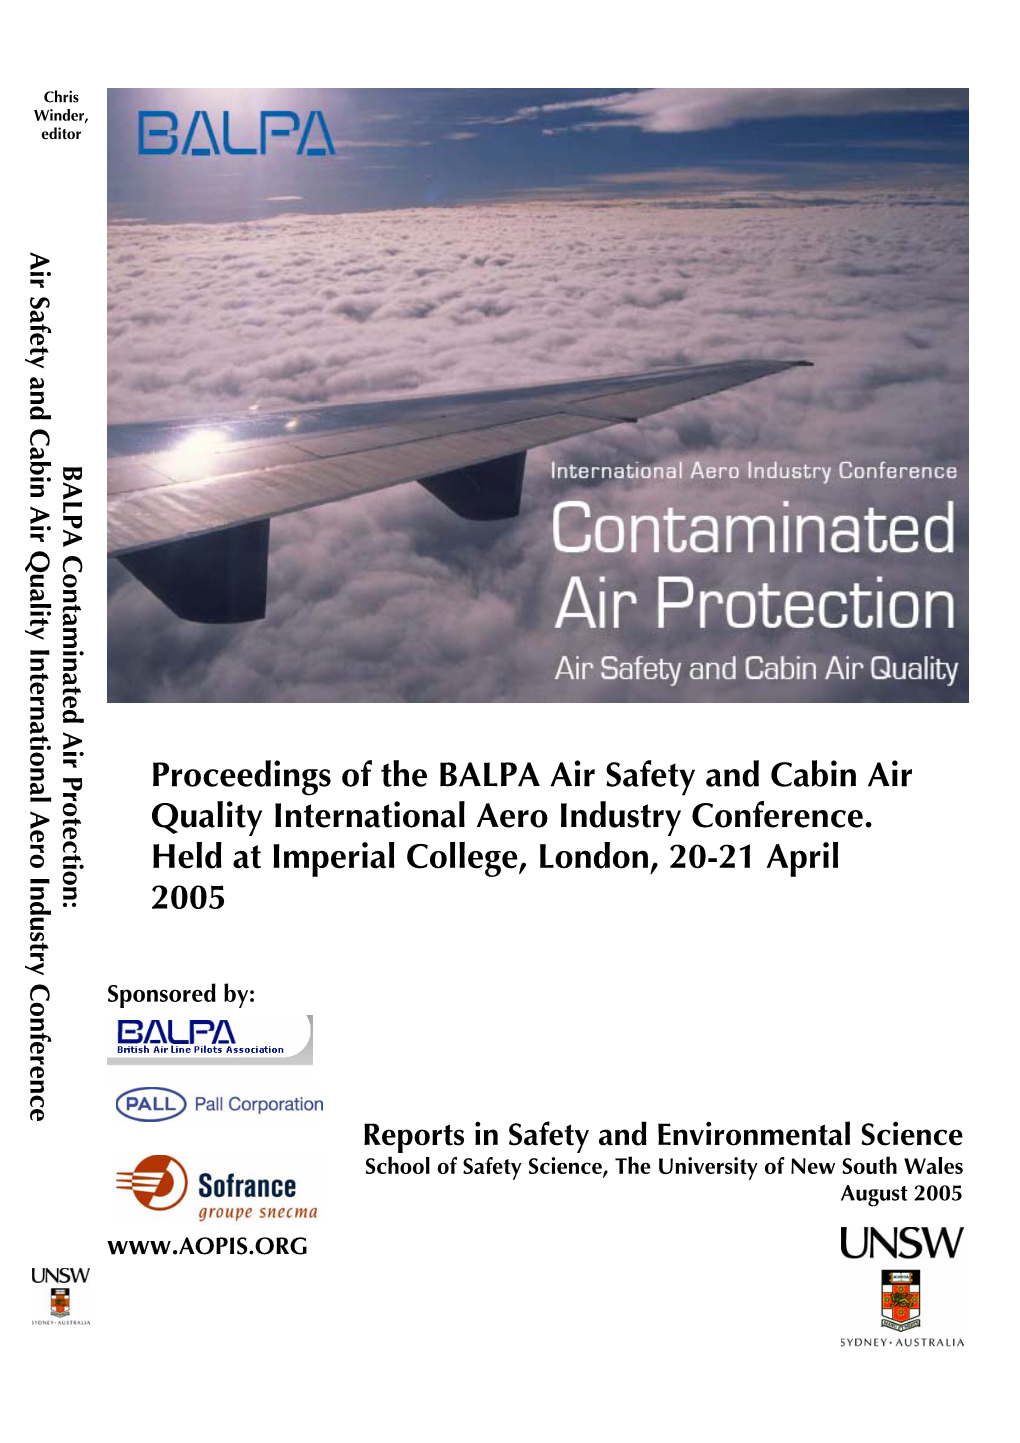 Proceedings of the BALPA Air Safety and Cabin Air Quality International Aero Industry Conference